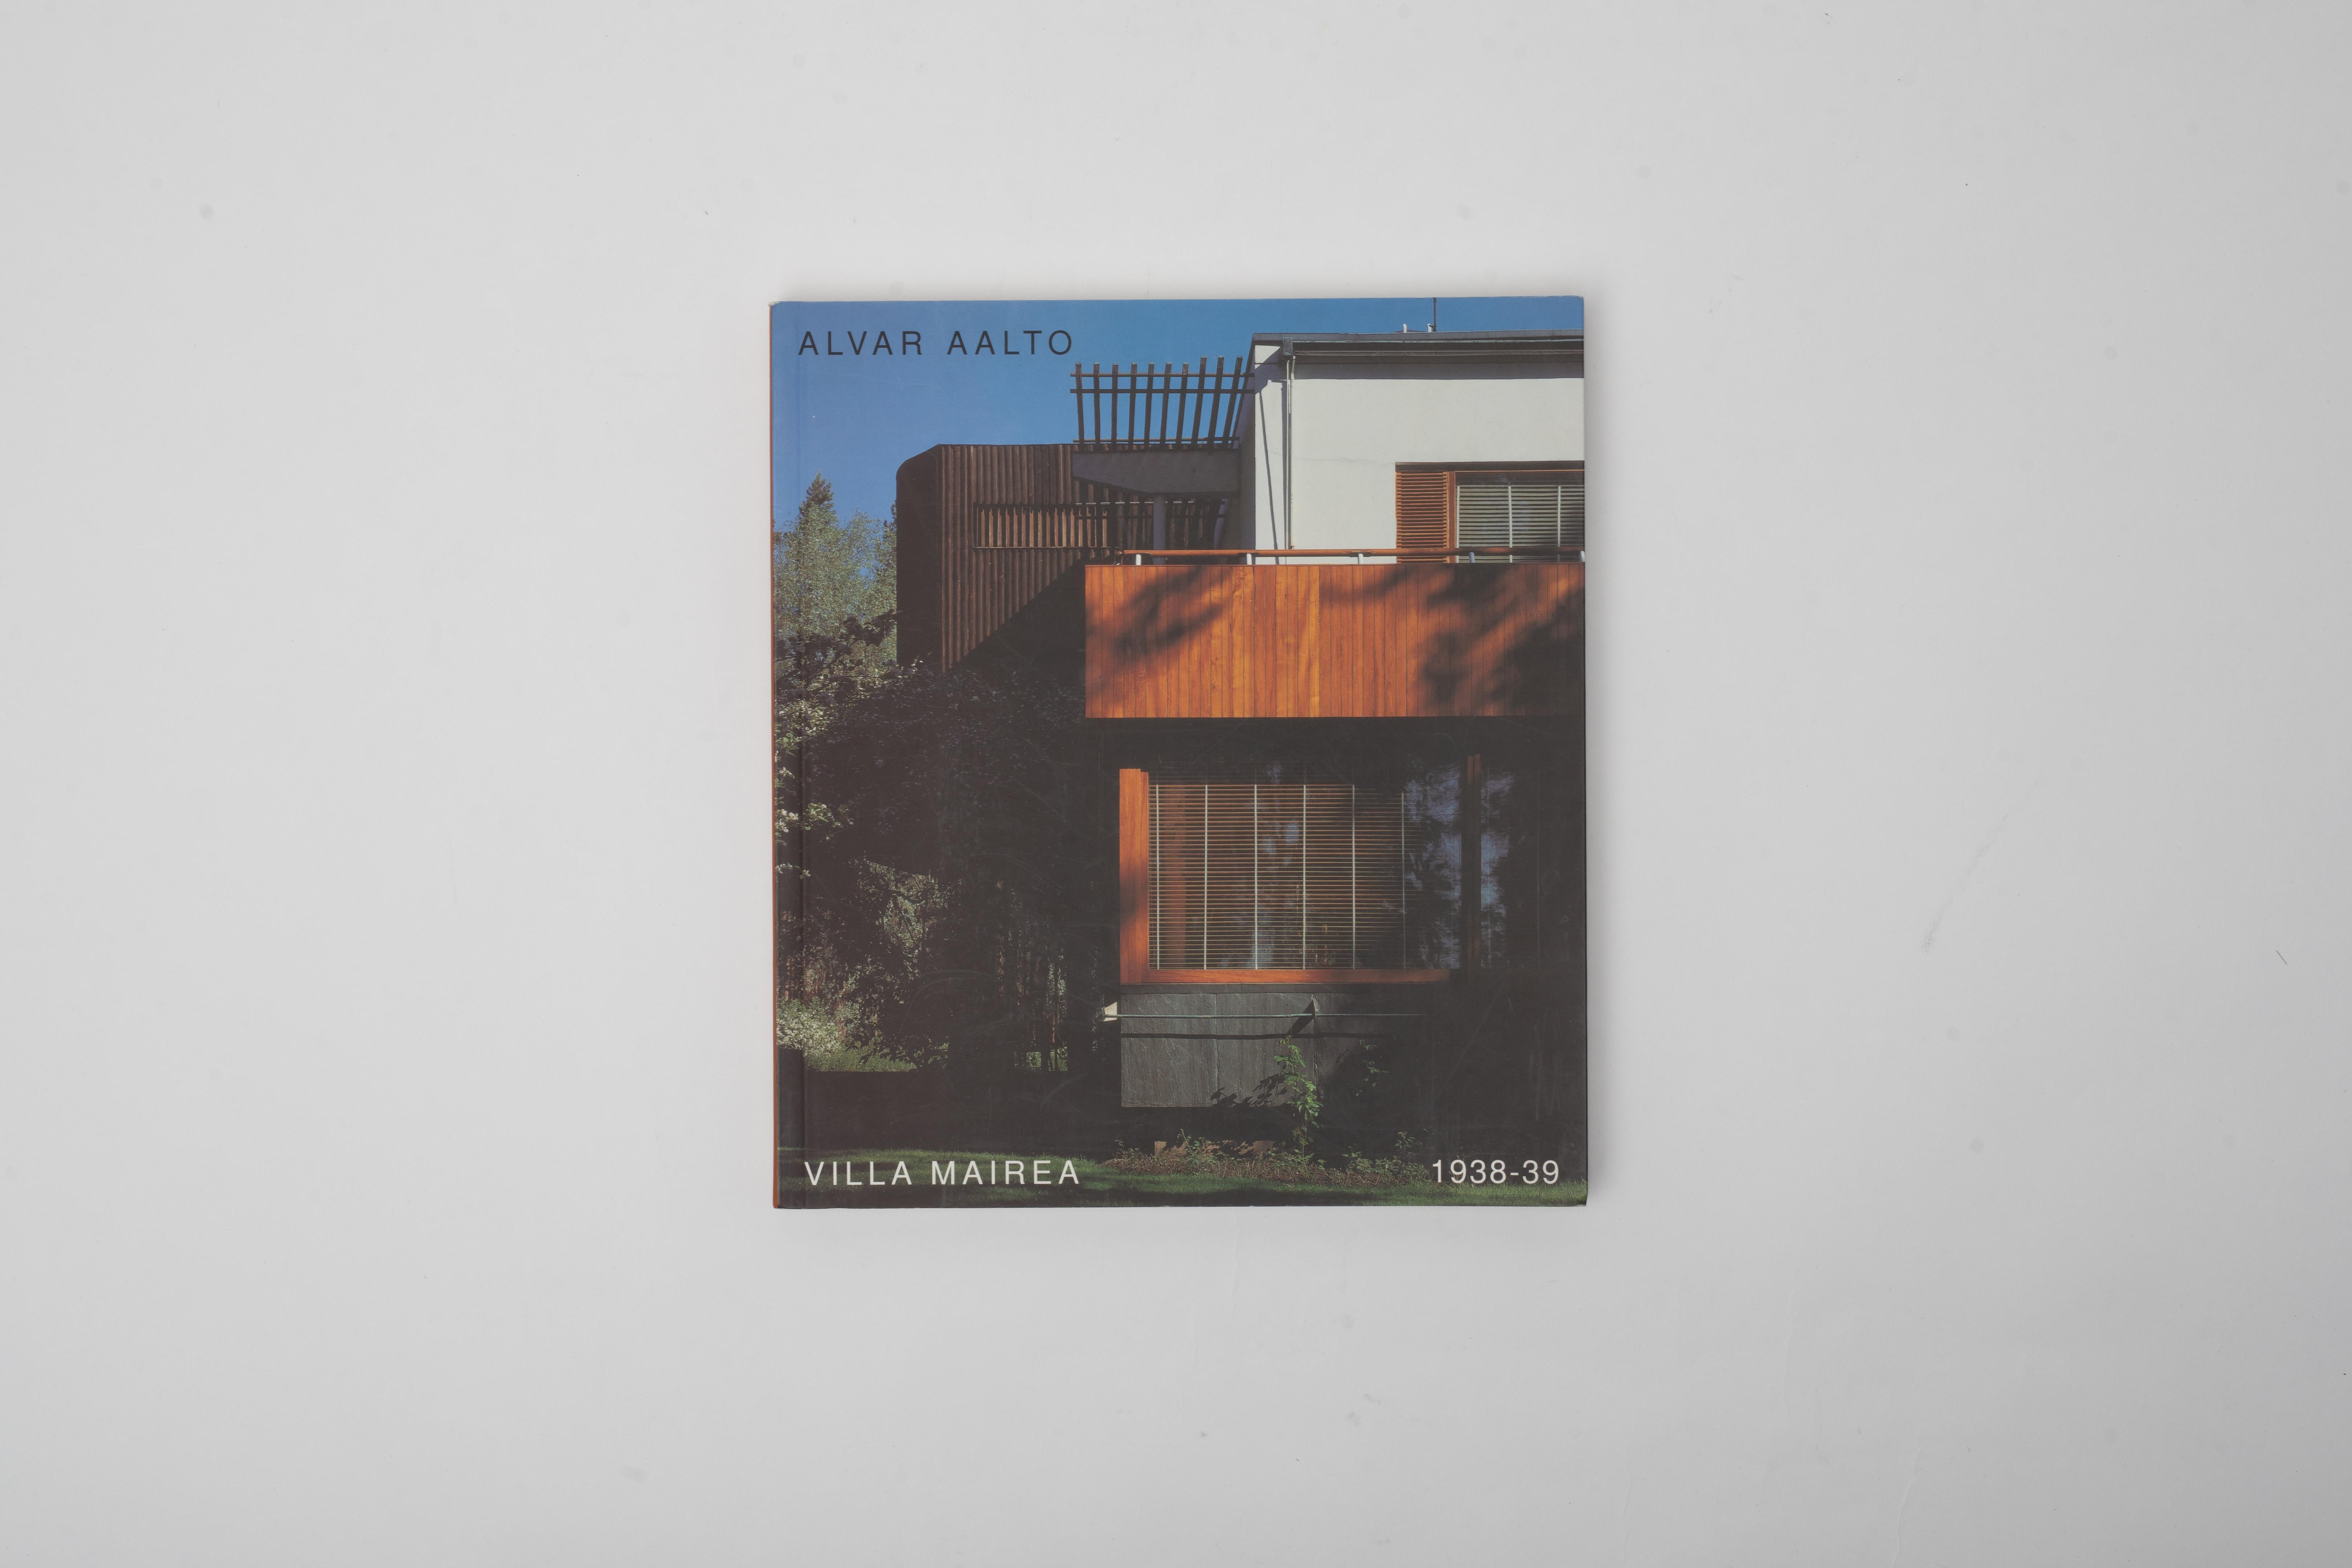 The seminal Aalto House, The complete work printed in colour from the Alvar Aalto Foundation. 168 pages, 355 illustrations,  perfect worn condition. No details are spared in this Tour de Alvar. The house from 1938-39 in english.
One of the best, by